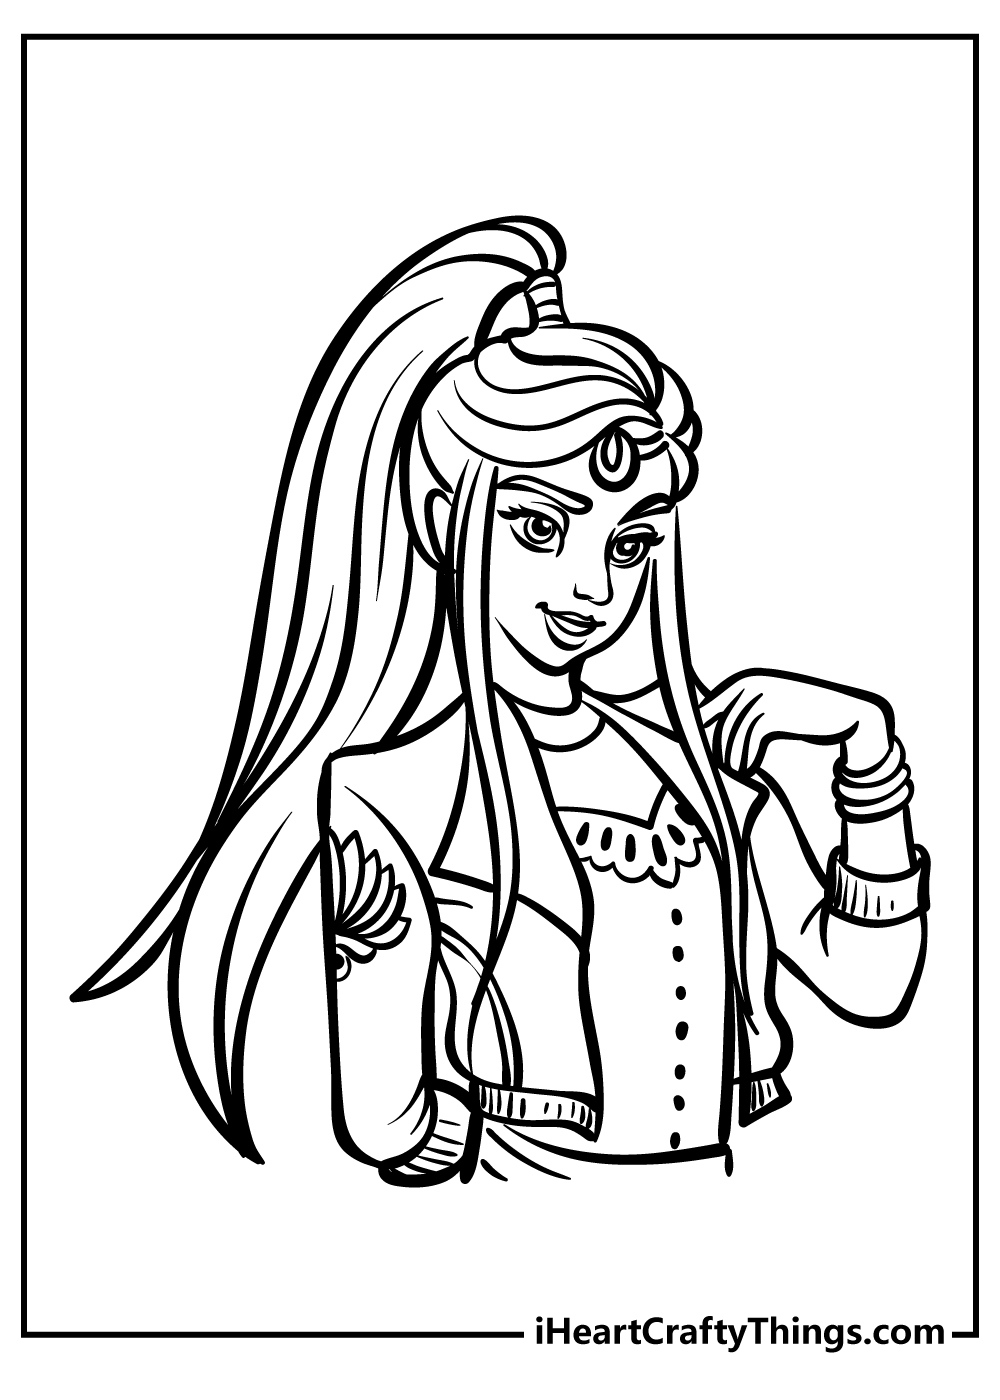 Descendants Coloring Pages for preschoolers free printable